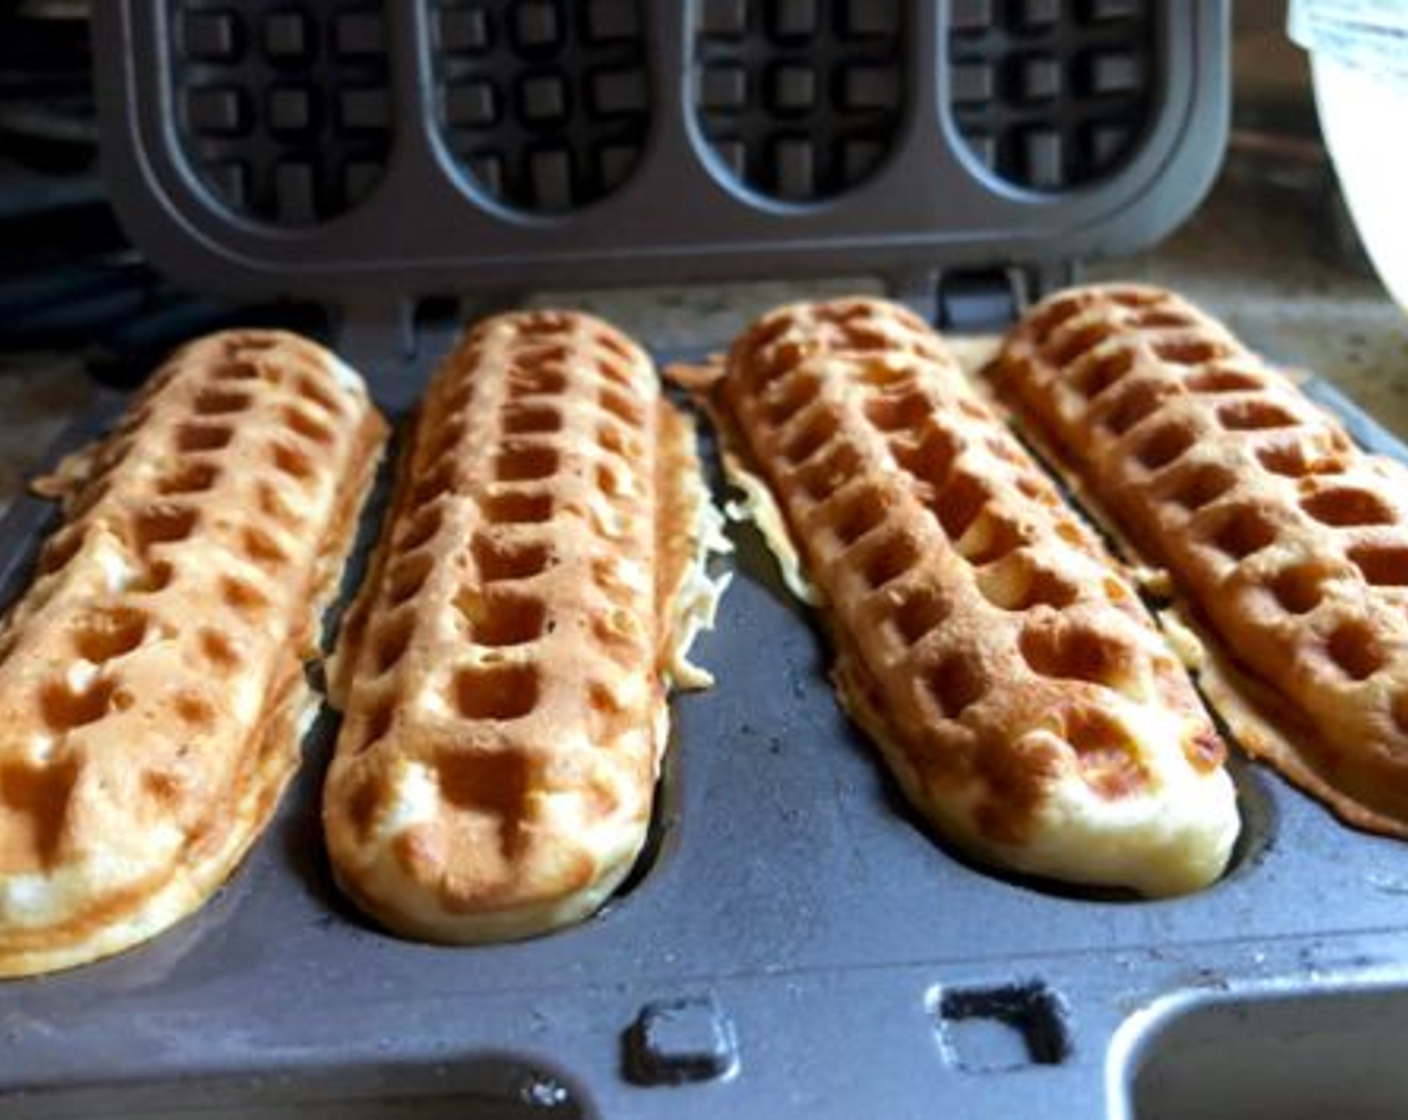 step 7 The waffles should take about two to three minutes per side, depending on your stove. The interior surface is nonstick, so the waffles should release from the pan without a problem.